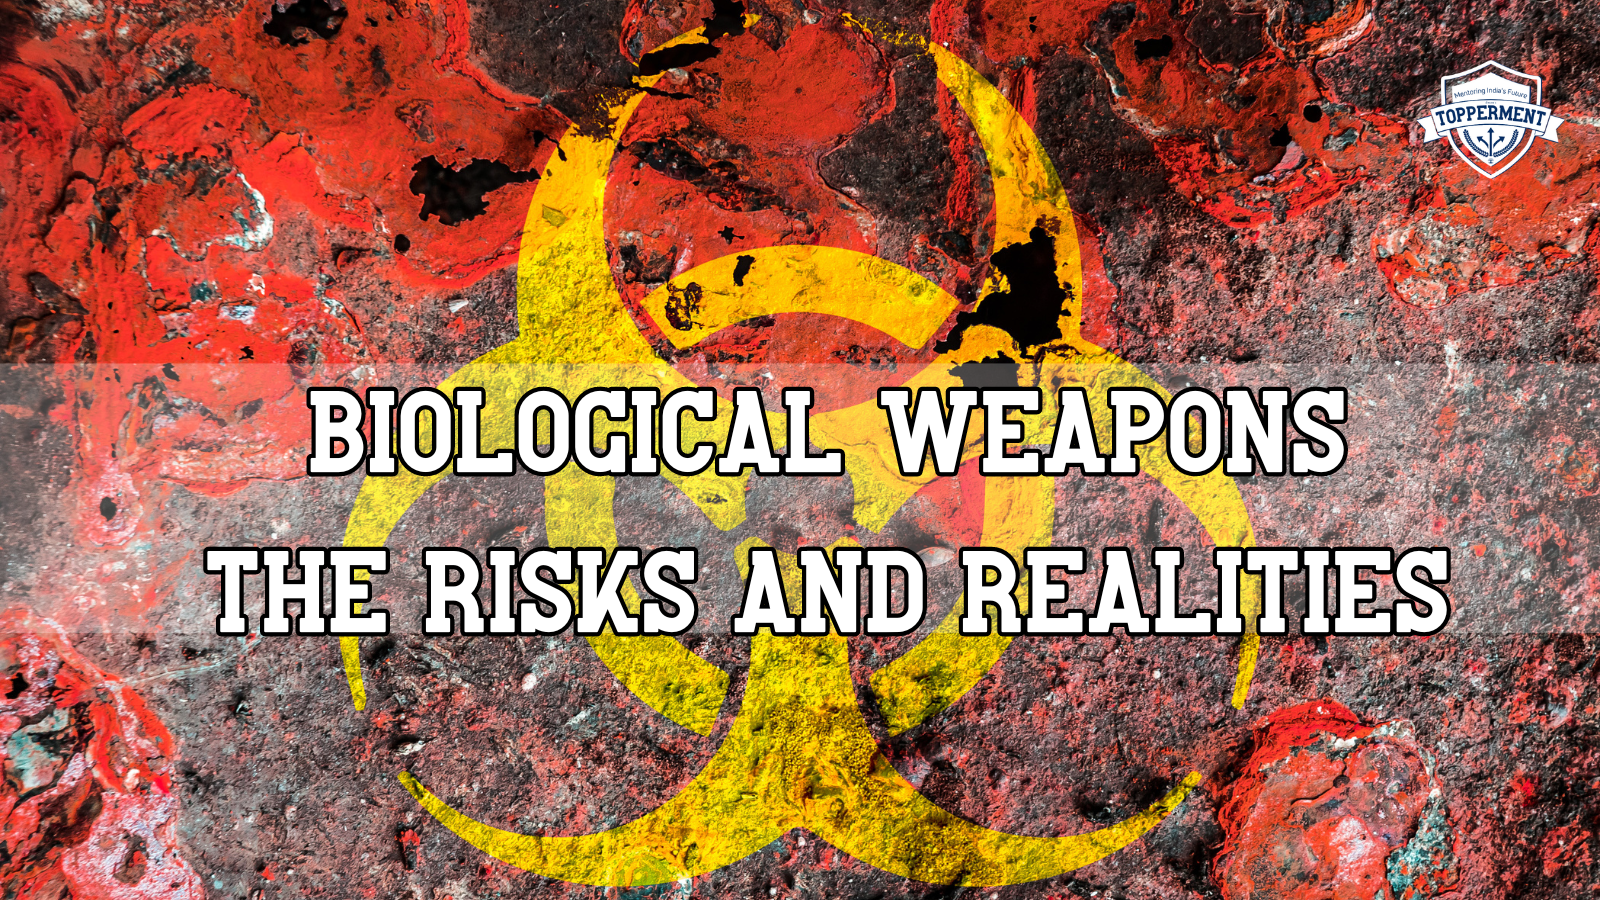 Biological-Weapons-_-Understanding-The-Risks-And-Realities-IAS-UPSC-Civil-Services-Mentorship-Guidance-Science